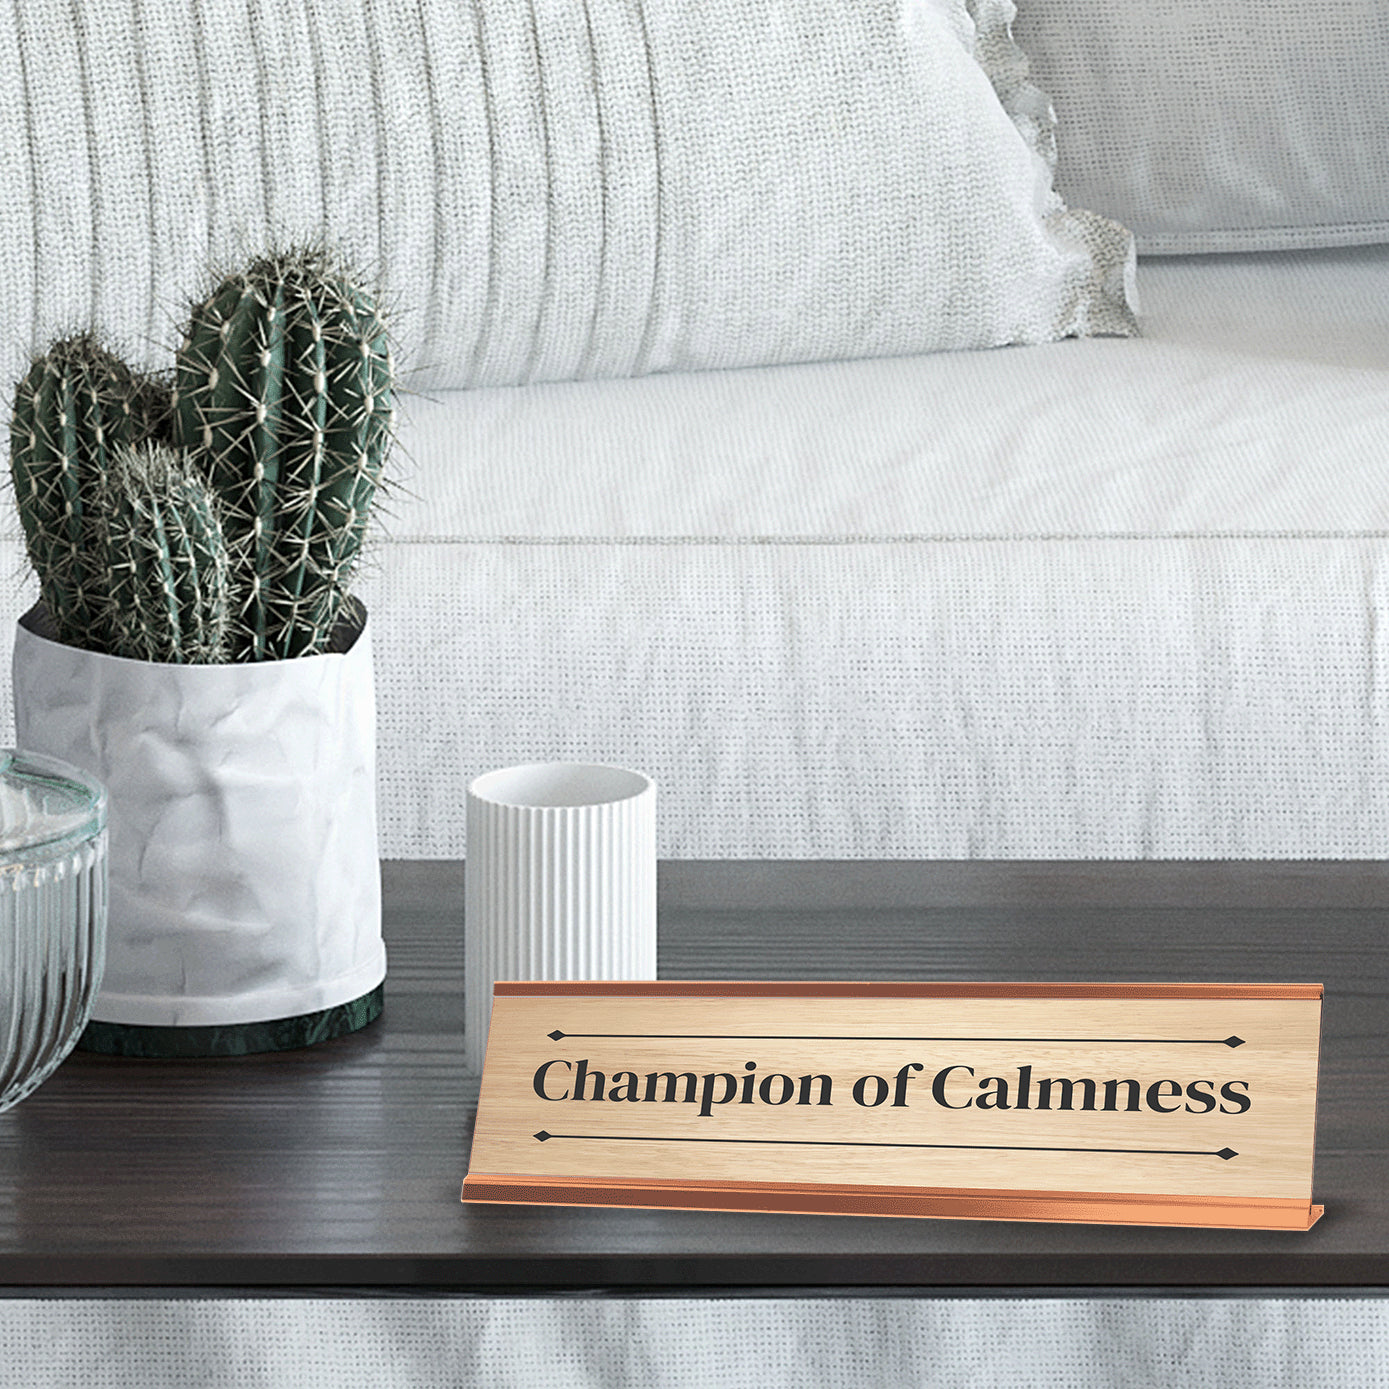 Champion of Calmness Rose Gold Frame Desk Sign (2x8") | Novelty Workplace and Home Office Decoration For Him